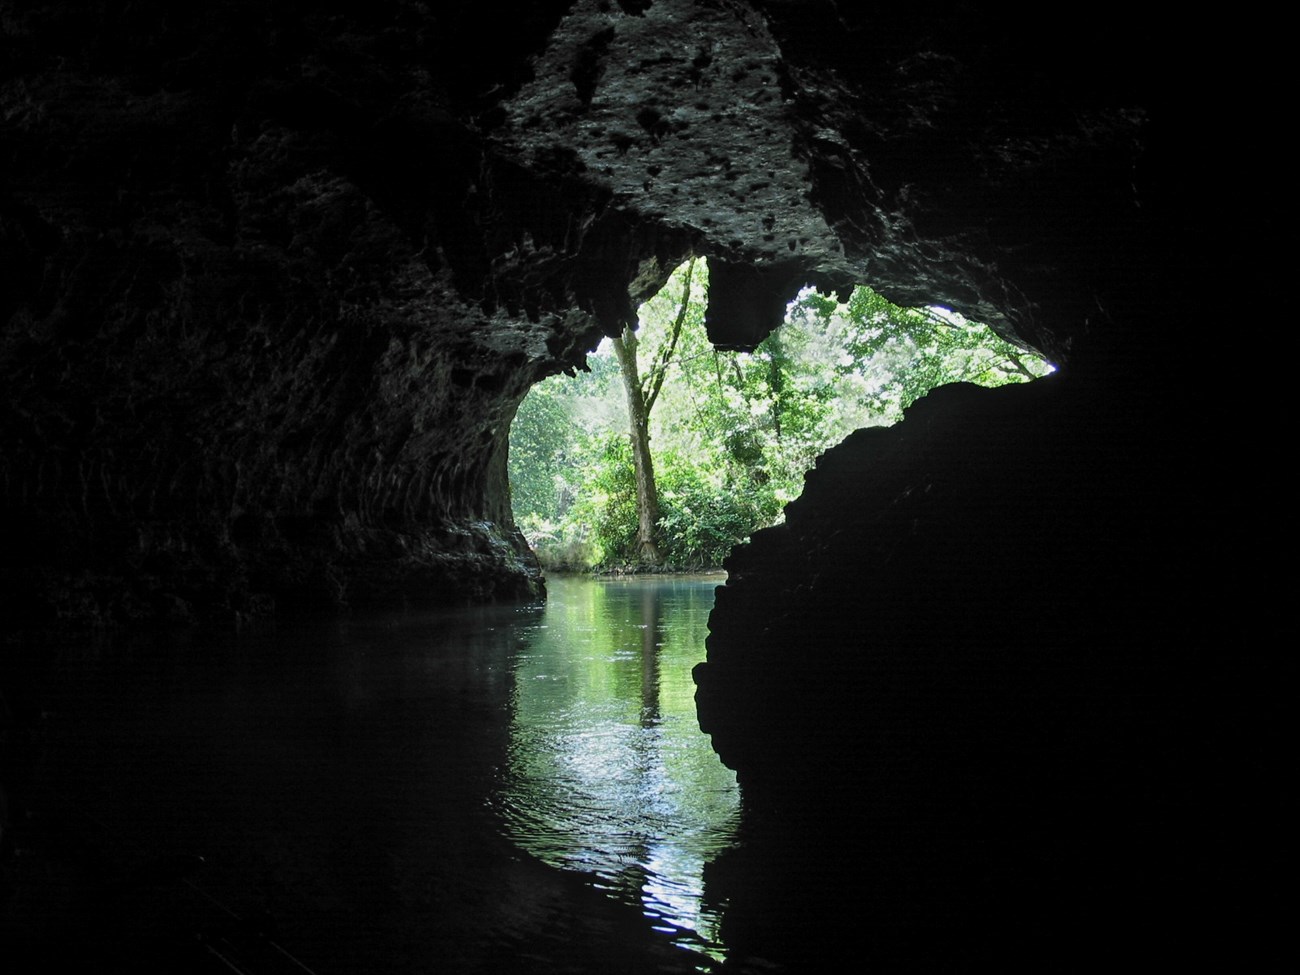 A dark cave opens into a river surrounded by greenery.